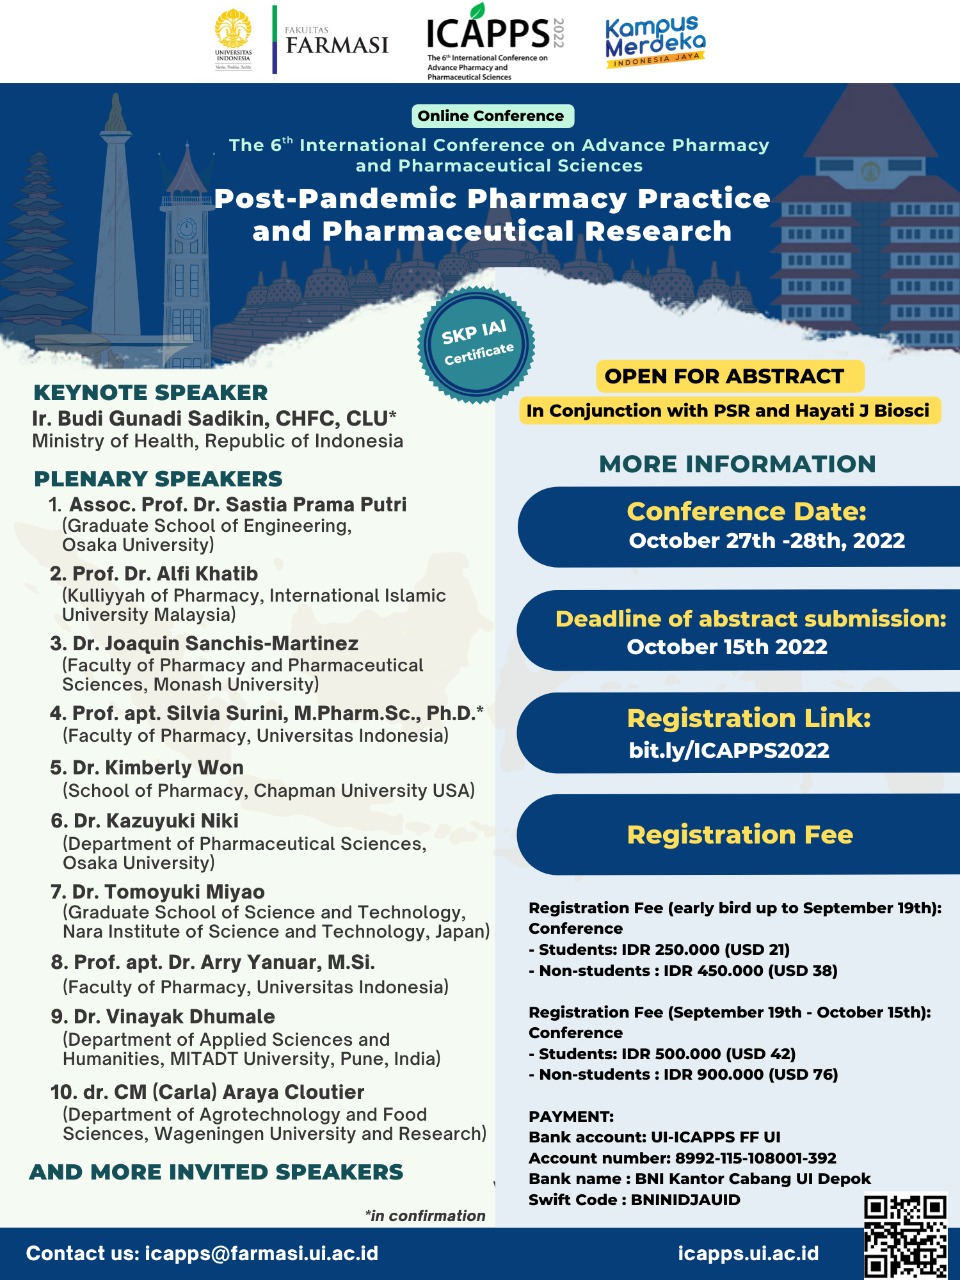 ICAPPS 2022: Post-Pandemic Pharmacy Practice and Pharmaceutical Research